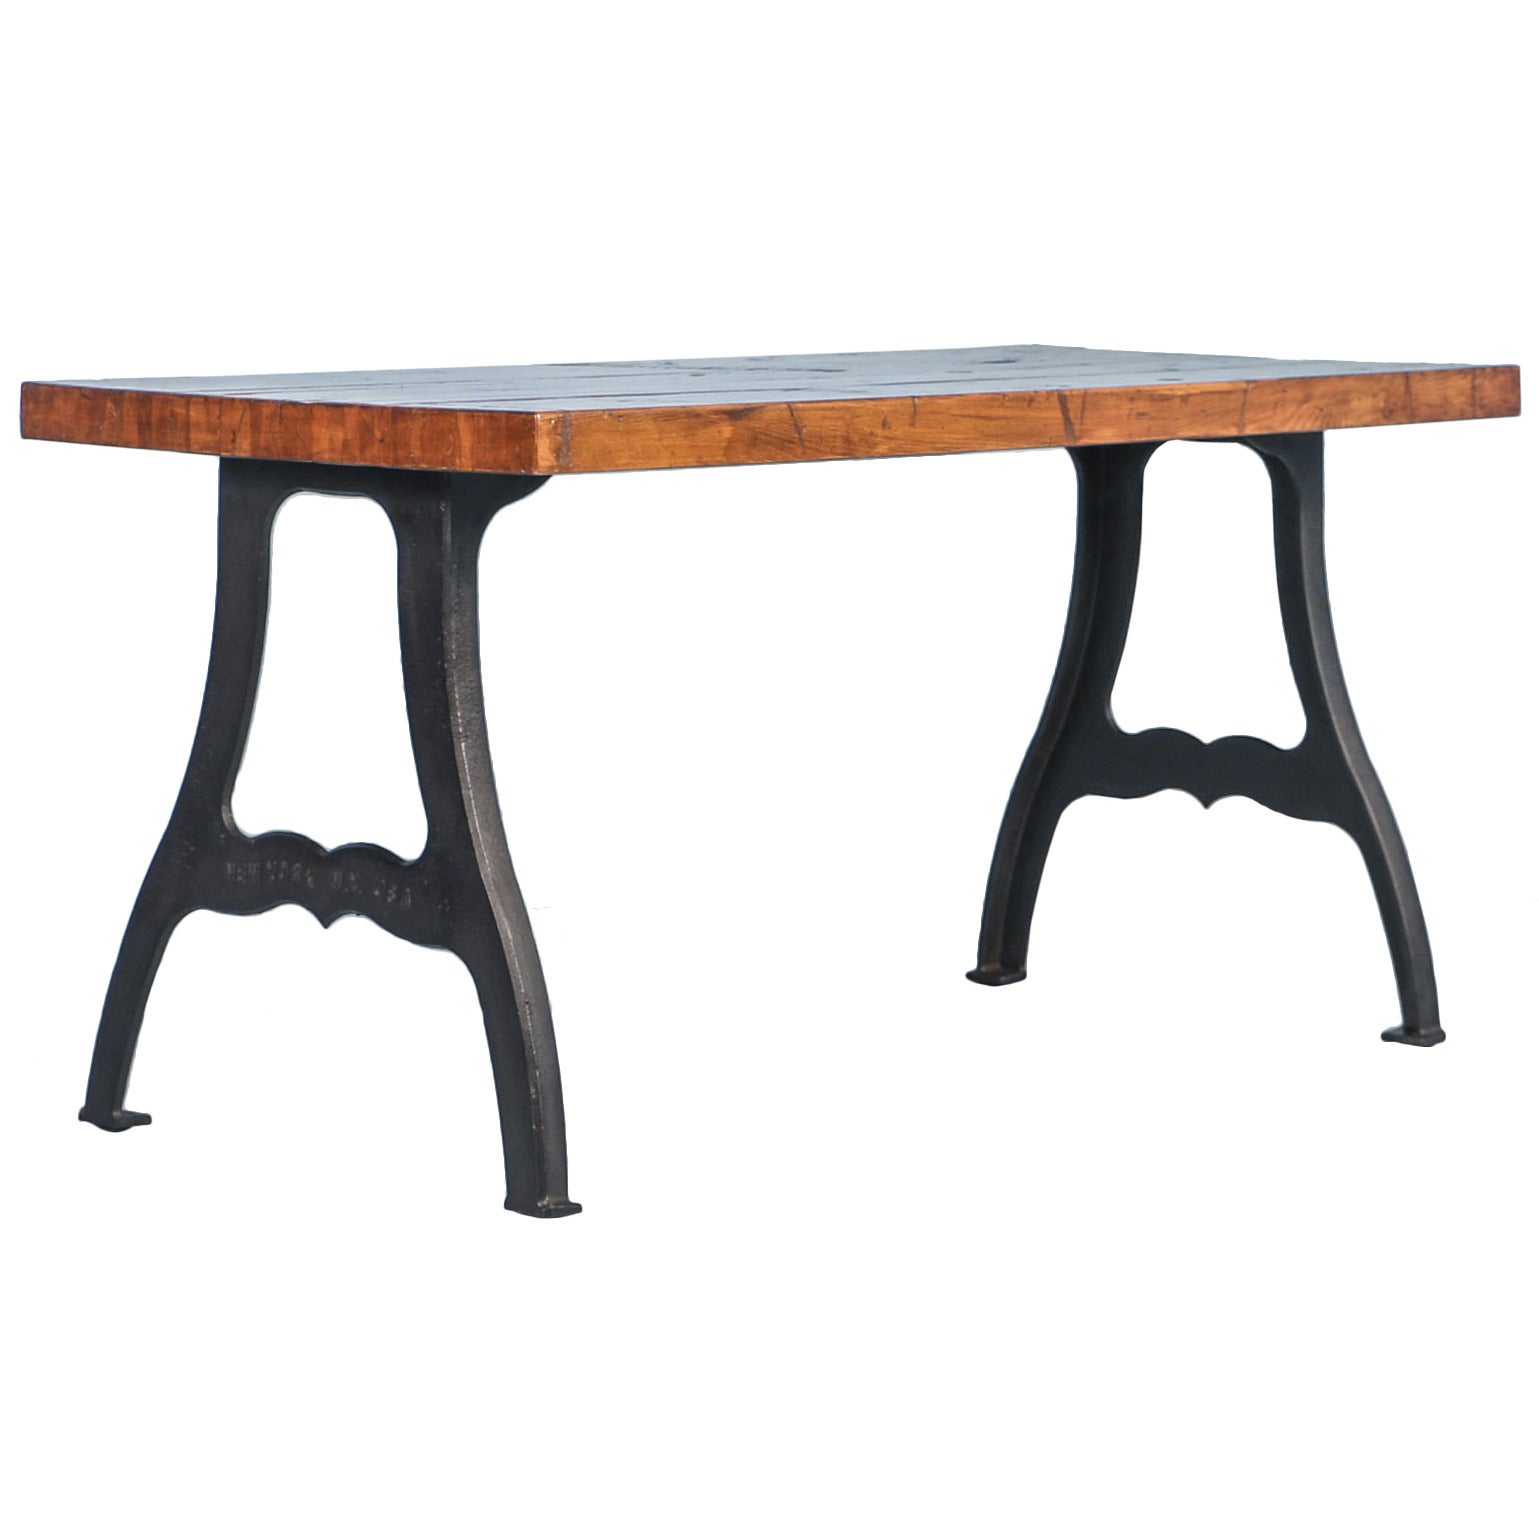 Rustic Writing or Kitchen Table Made from Reclaimed Wood and Cast Iron Legs